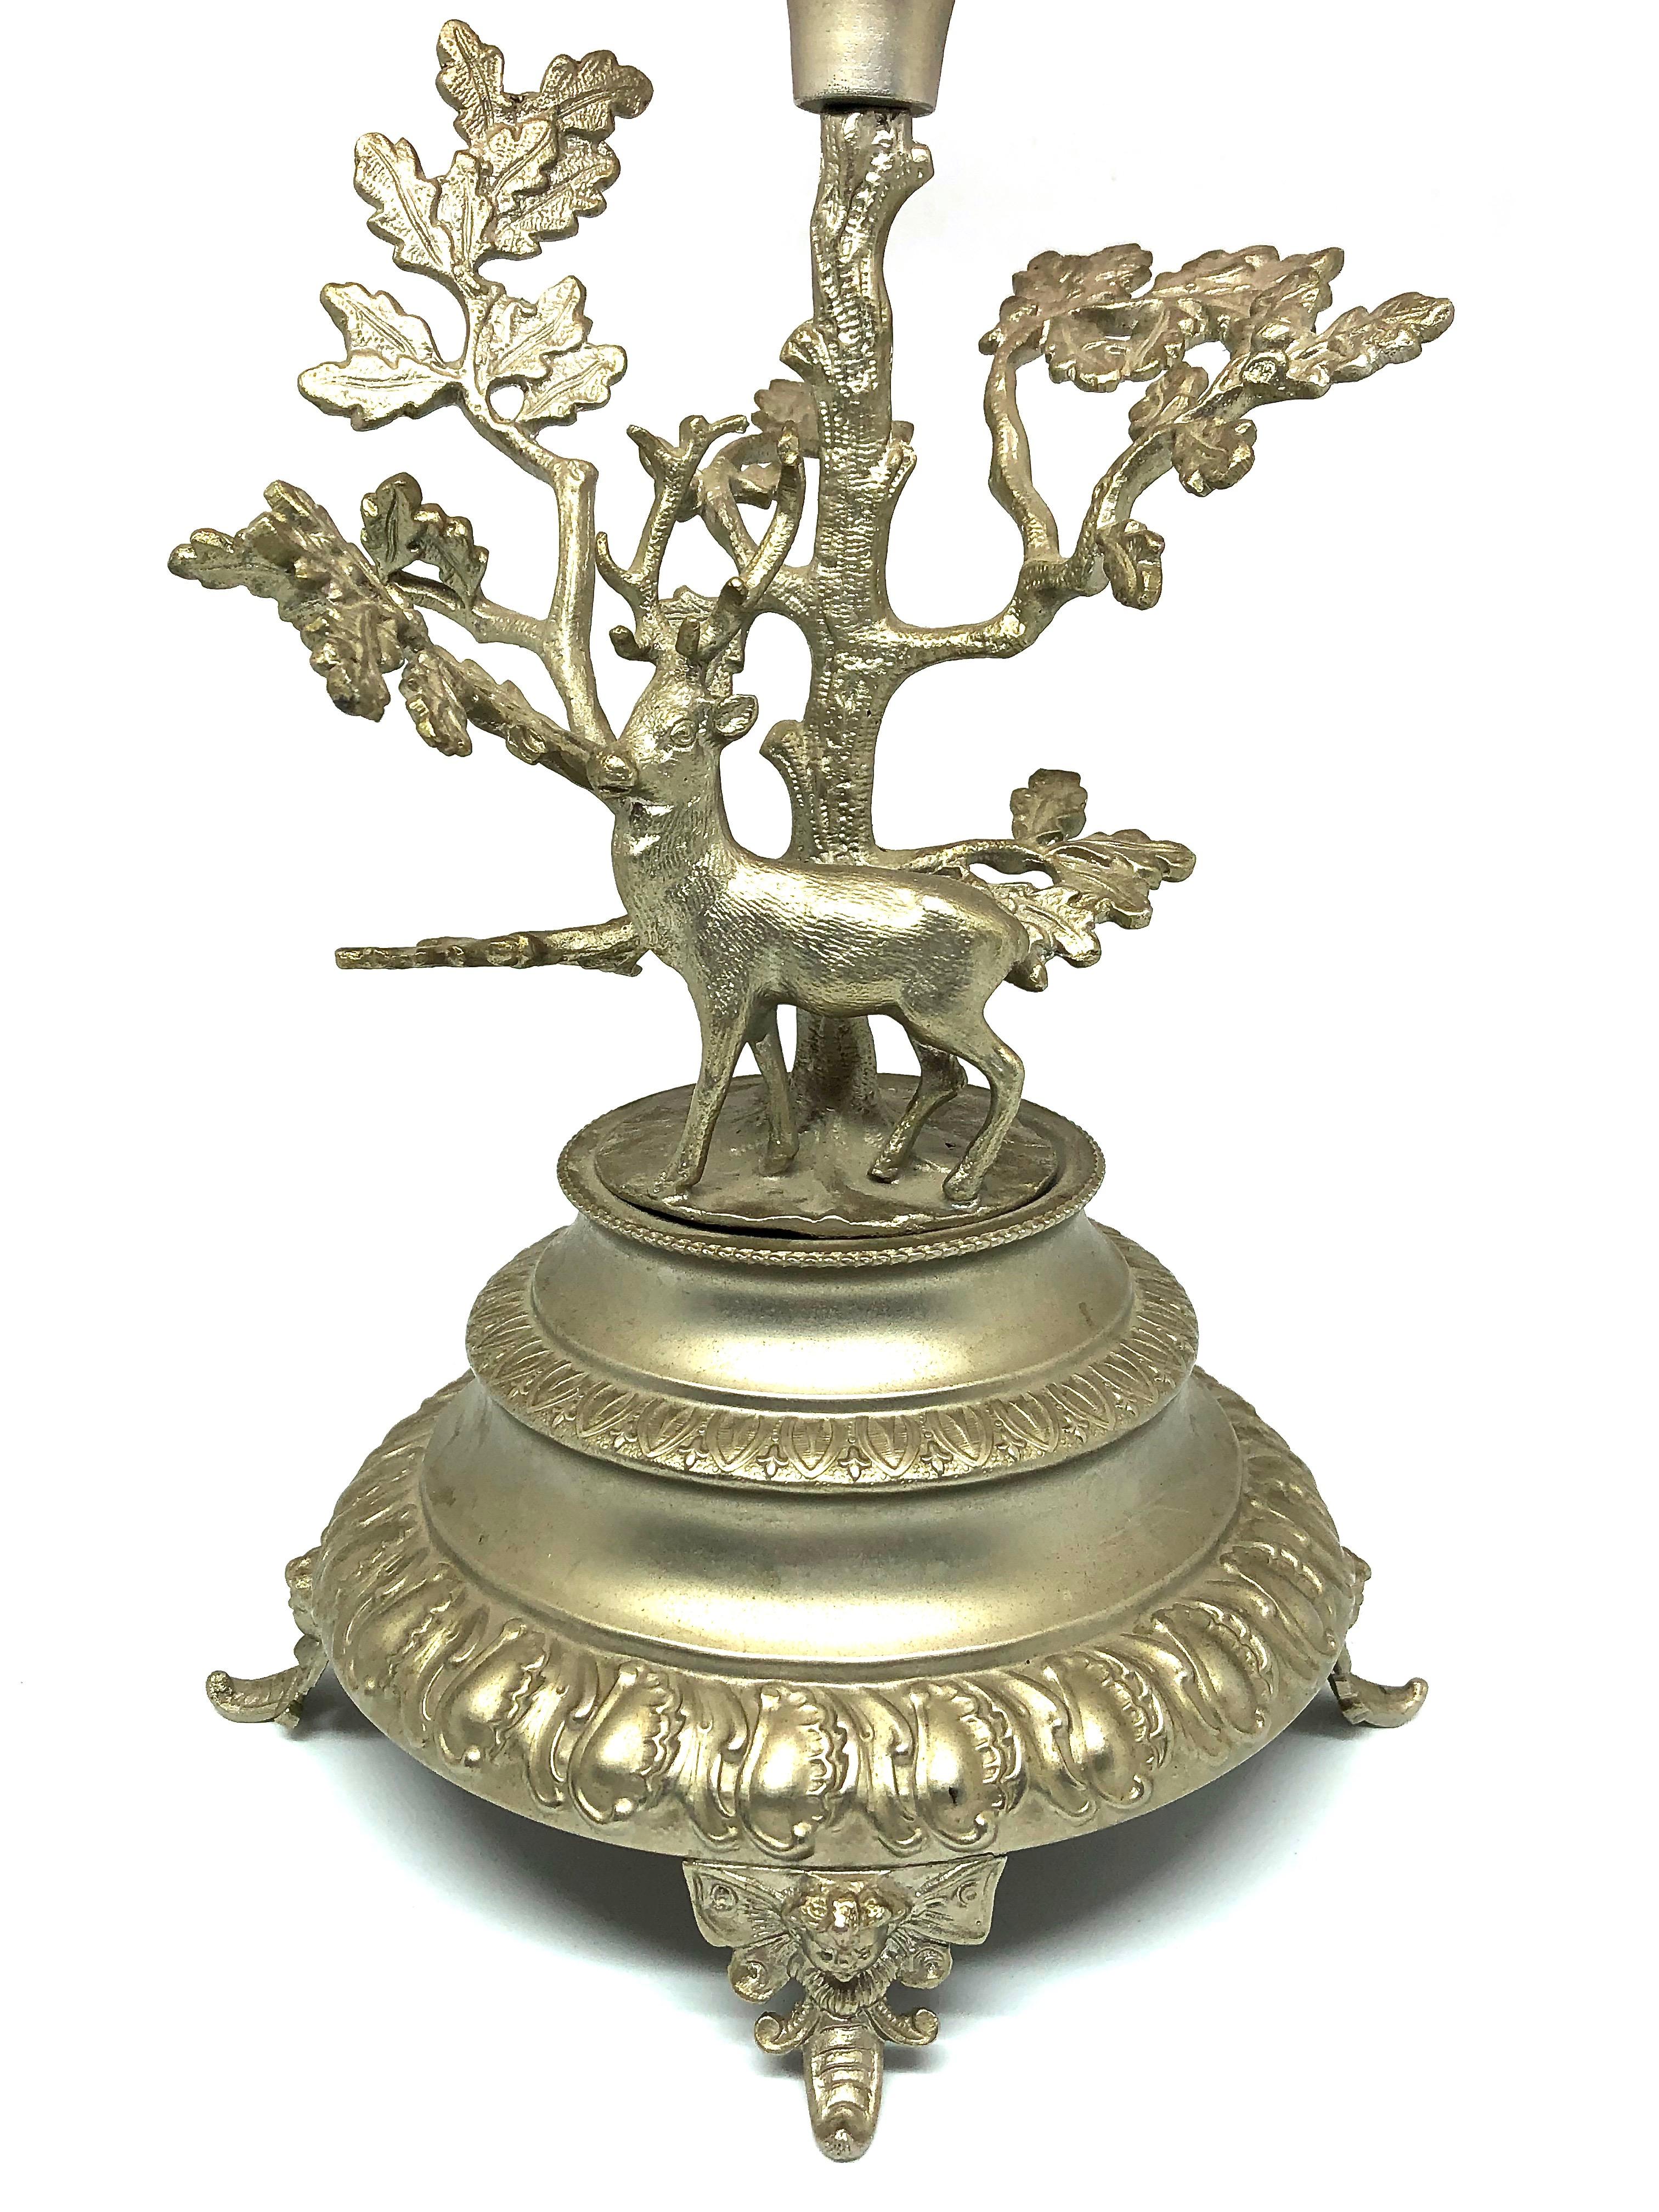 An estate treasure, a gorgeous Victorian era stag deer stand with floral cranberry and clear glass compote. The glass has a ruffled edge. The stand shows a deer under an oak tree. This unique treasure is in nice pre-owned condition with no cracks or